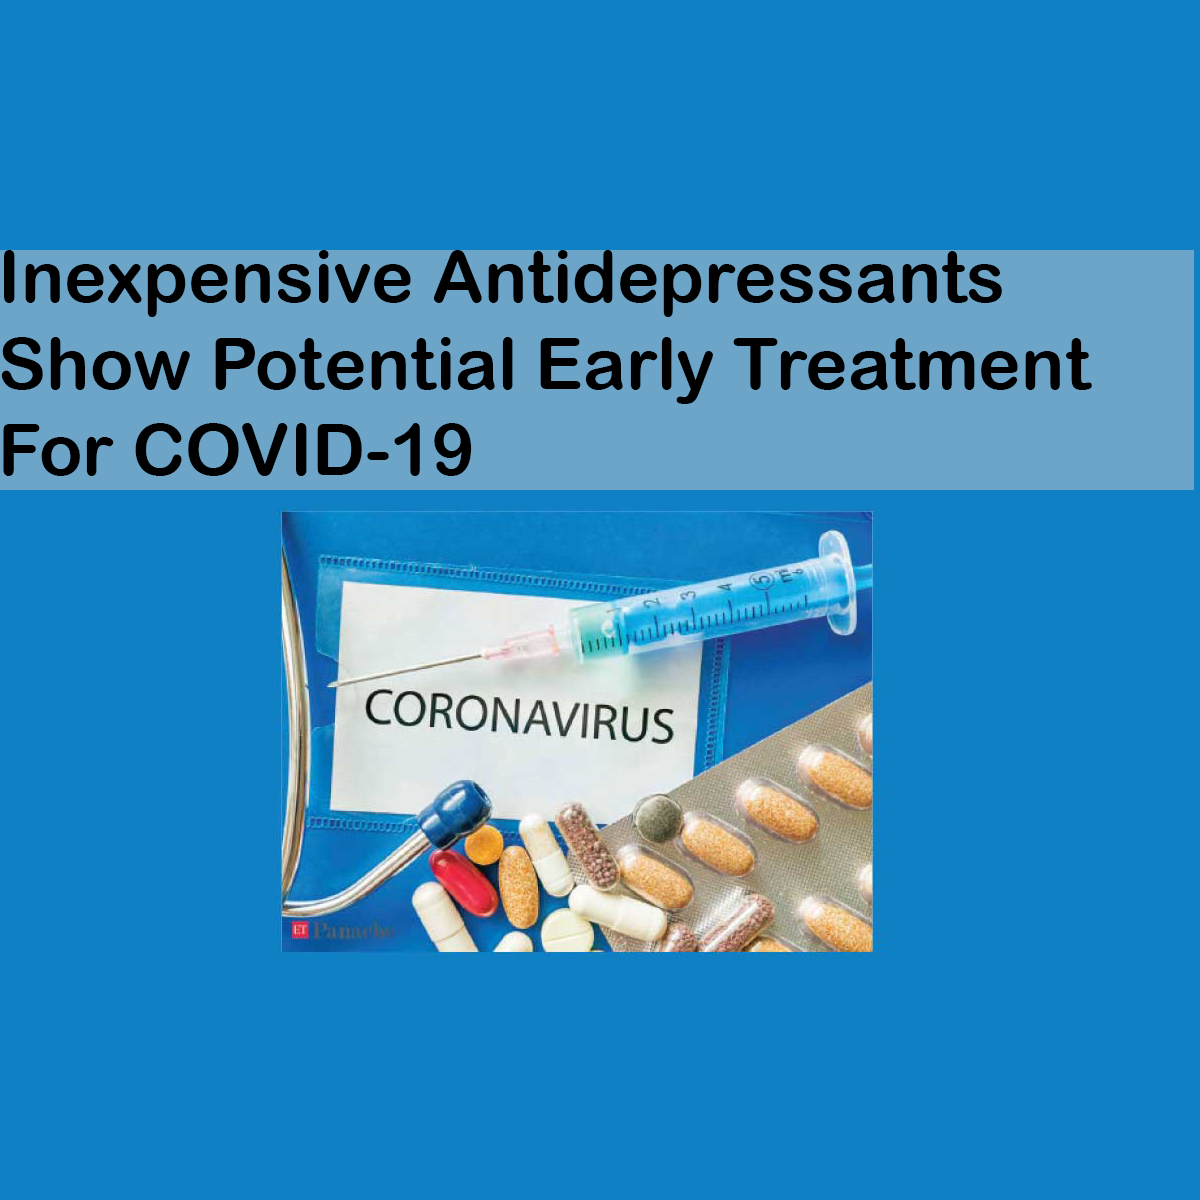 Inexpensive Antidepressants Show Potential Early Treatment For COVID-19